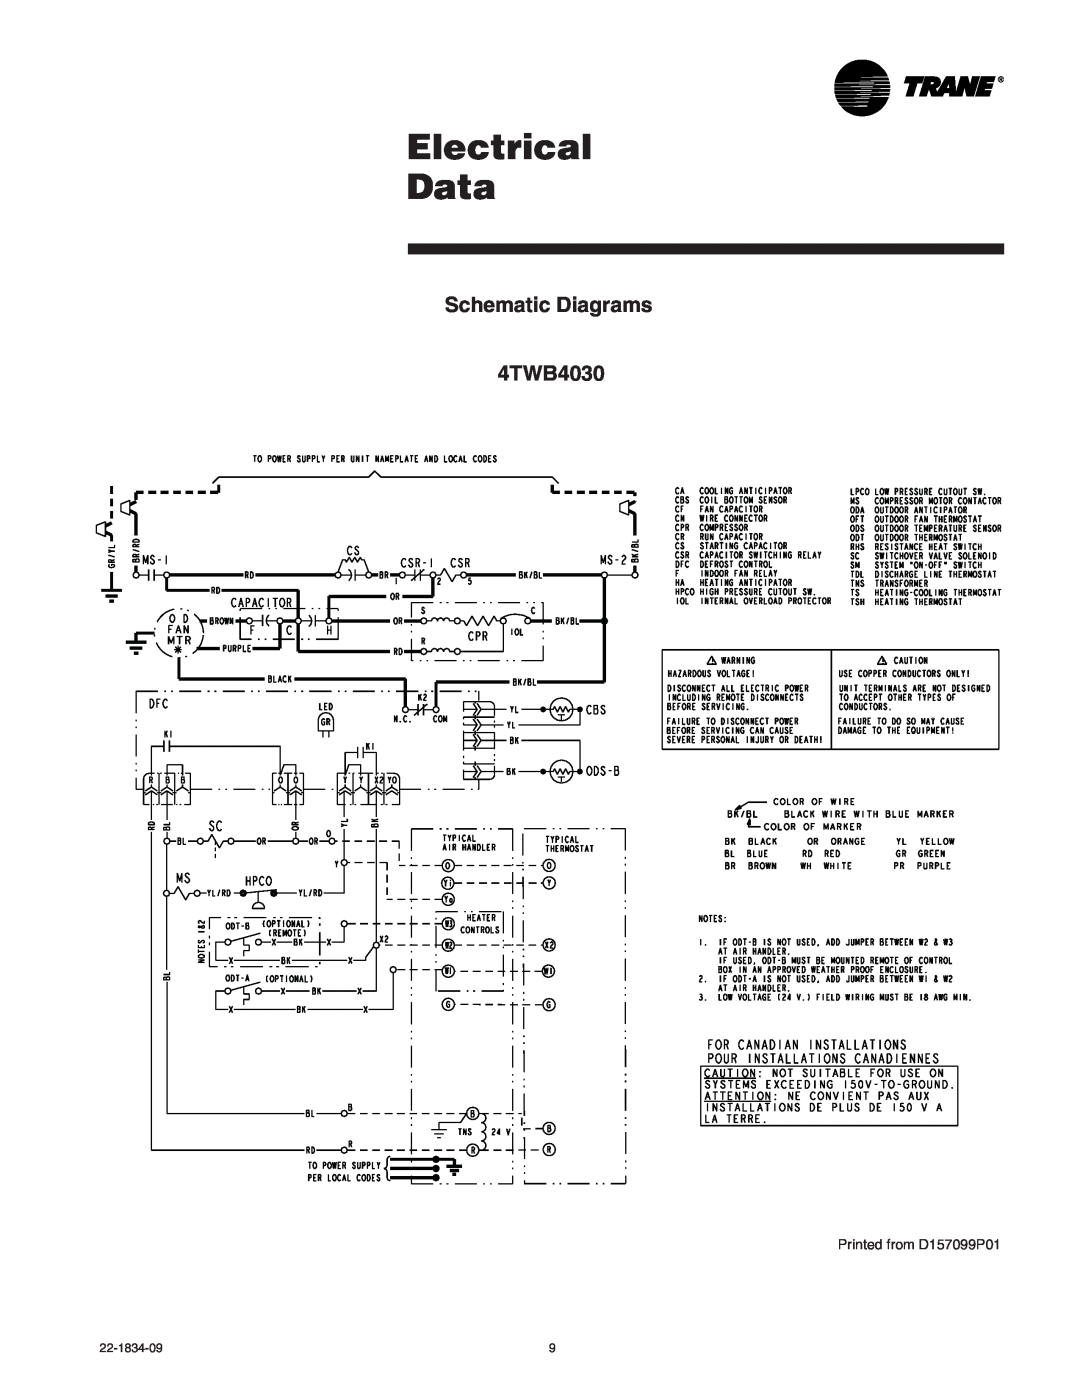 Trane manual Electrical Data, Schematic Diagrams 4TWB4030, Printed from D157099P01 